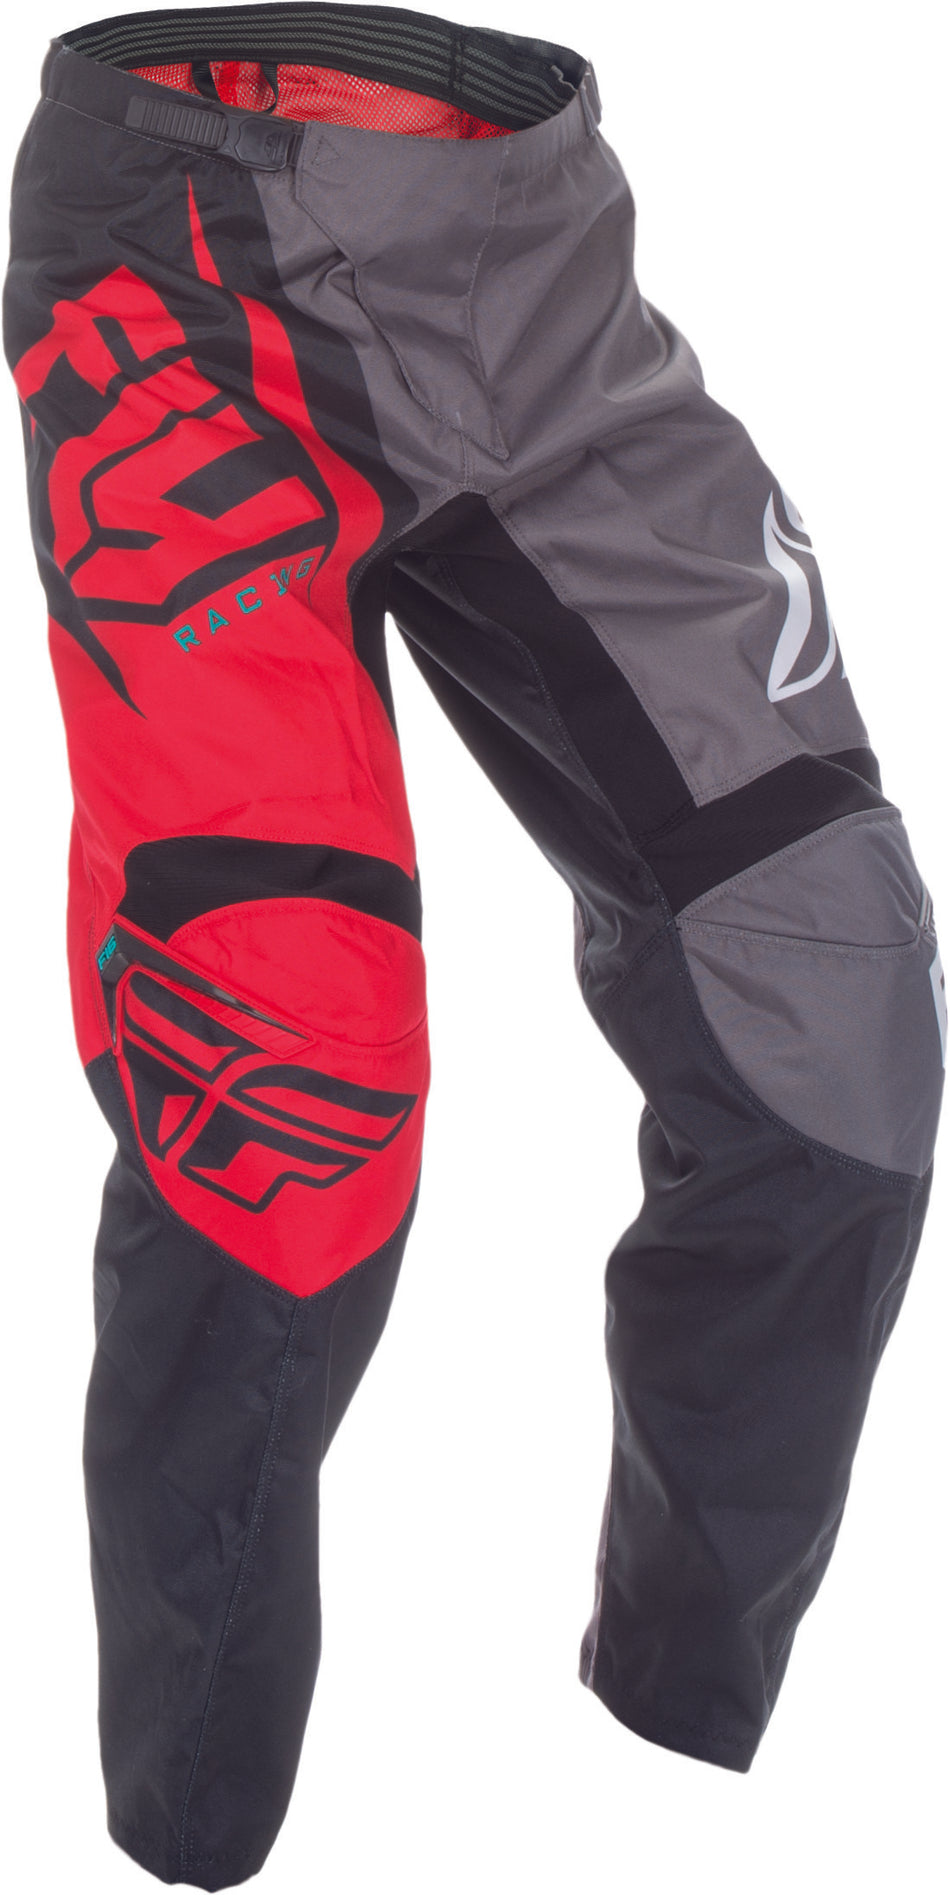 FLY RACING F-16 Pant Red/Black/Grey Sz 26 370-93226